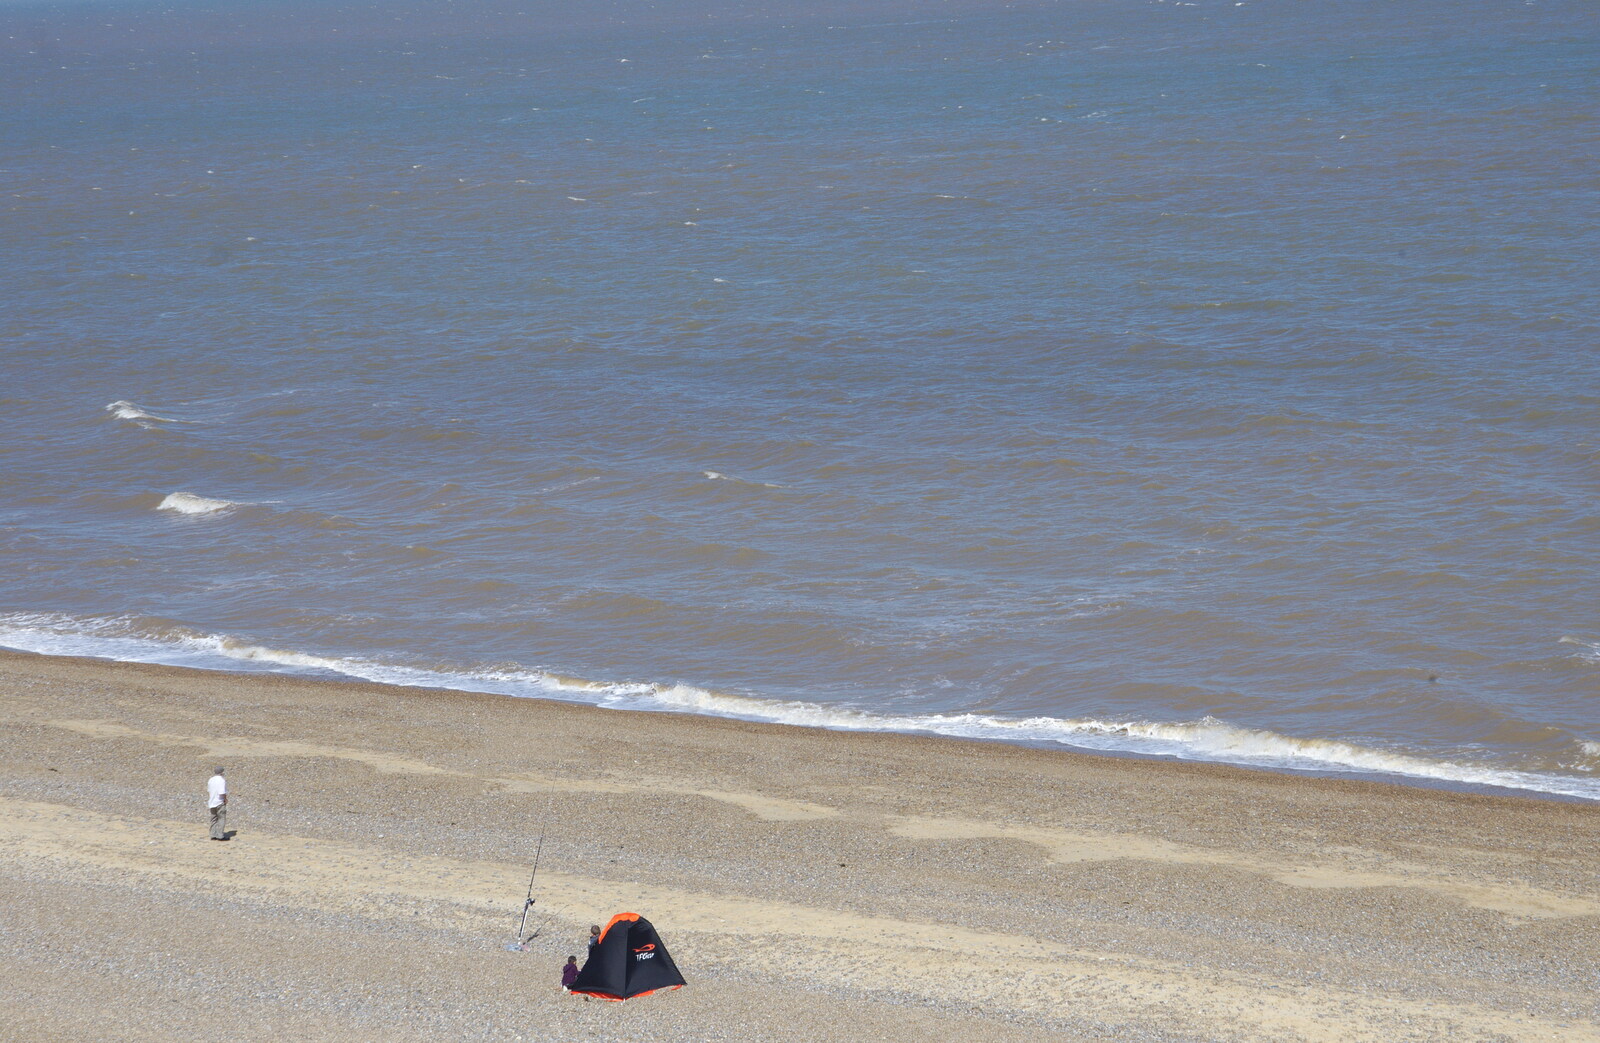 A solitary dude on the beach from Cliff House Camping, Dunwich, Suffolk - 15th June 2019